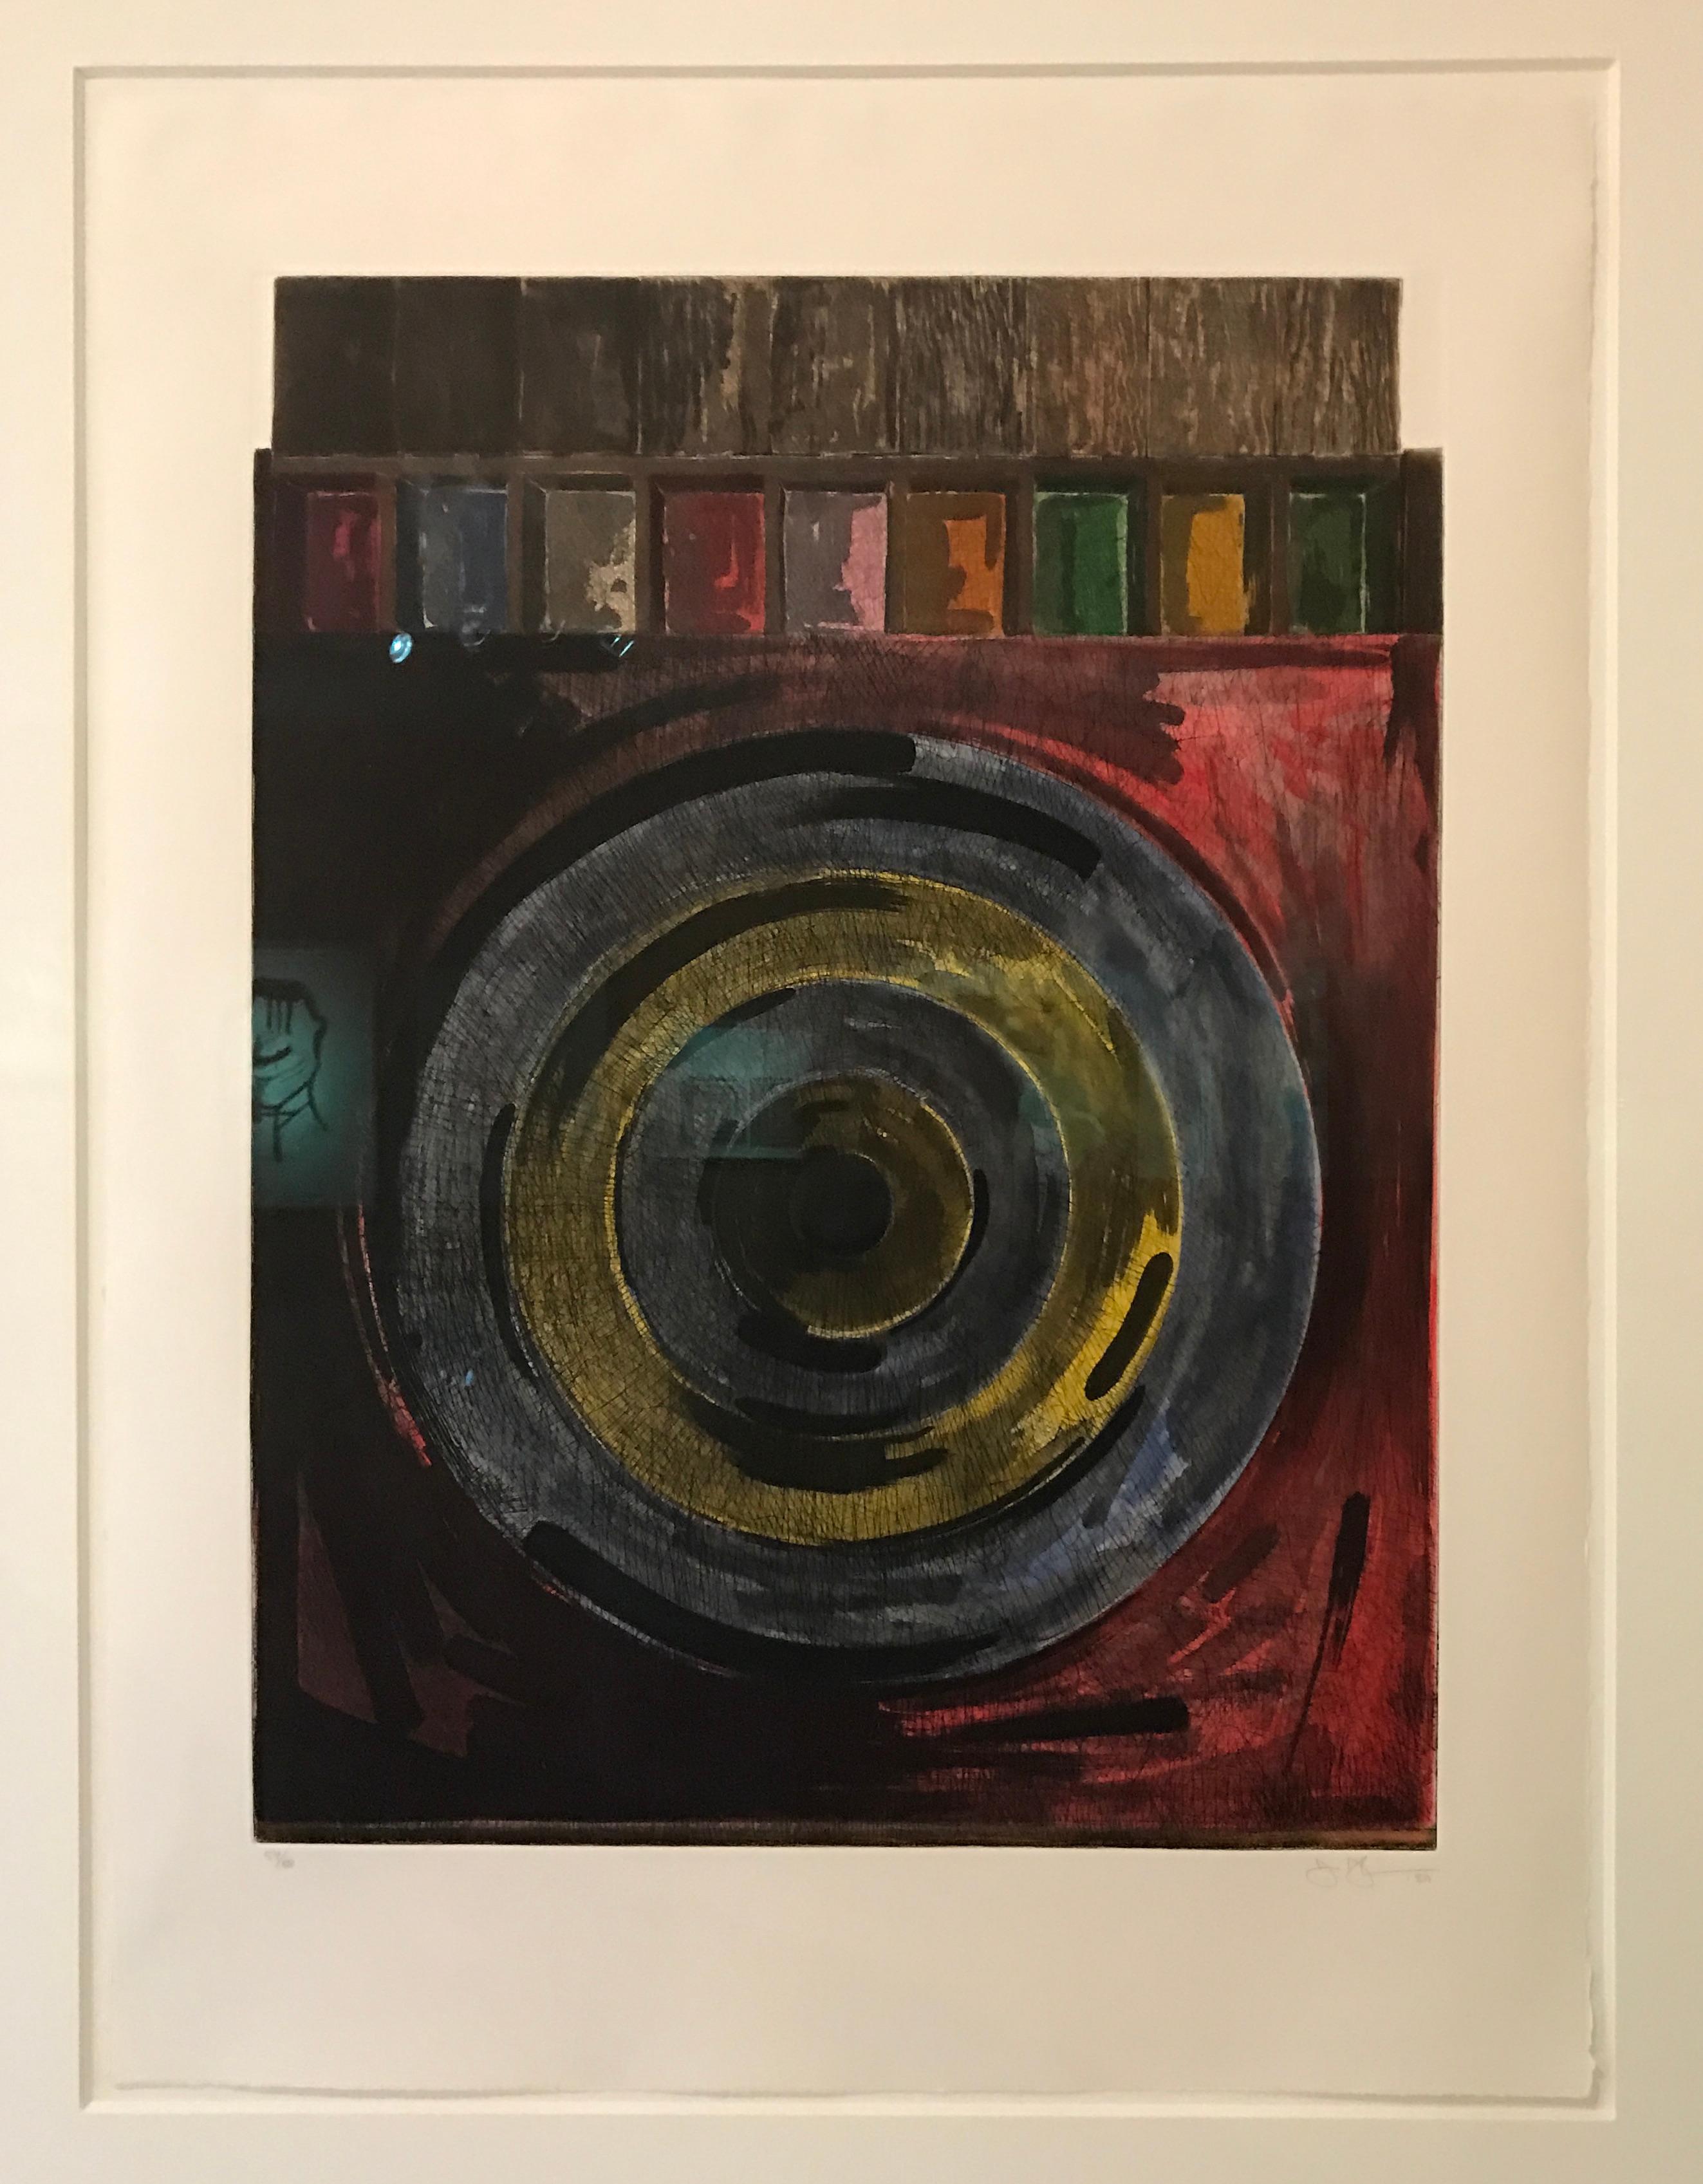 Target With Plaster Casts - Print by Jasper Johns